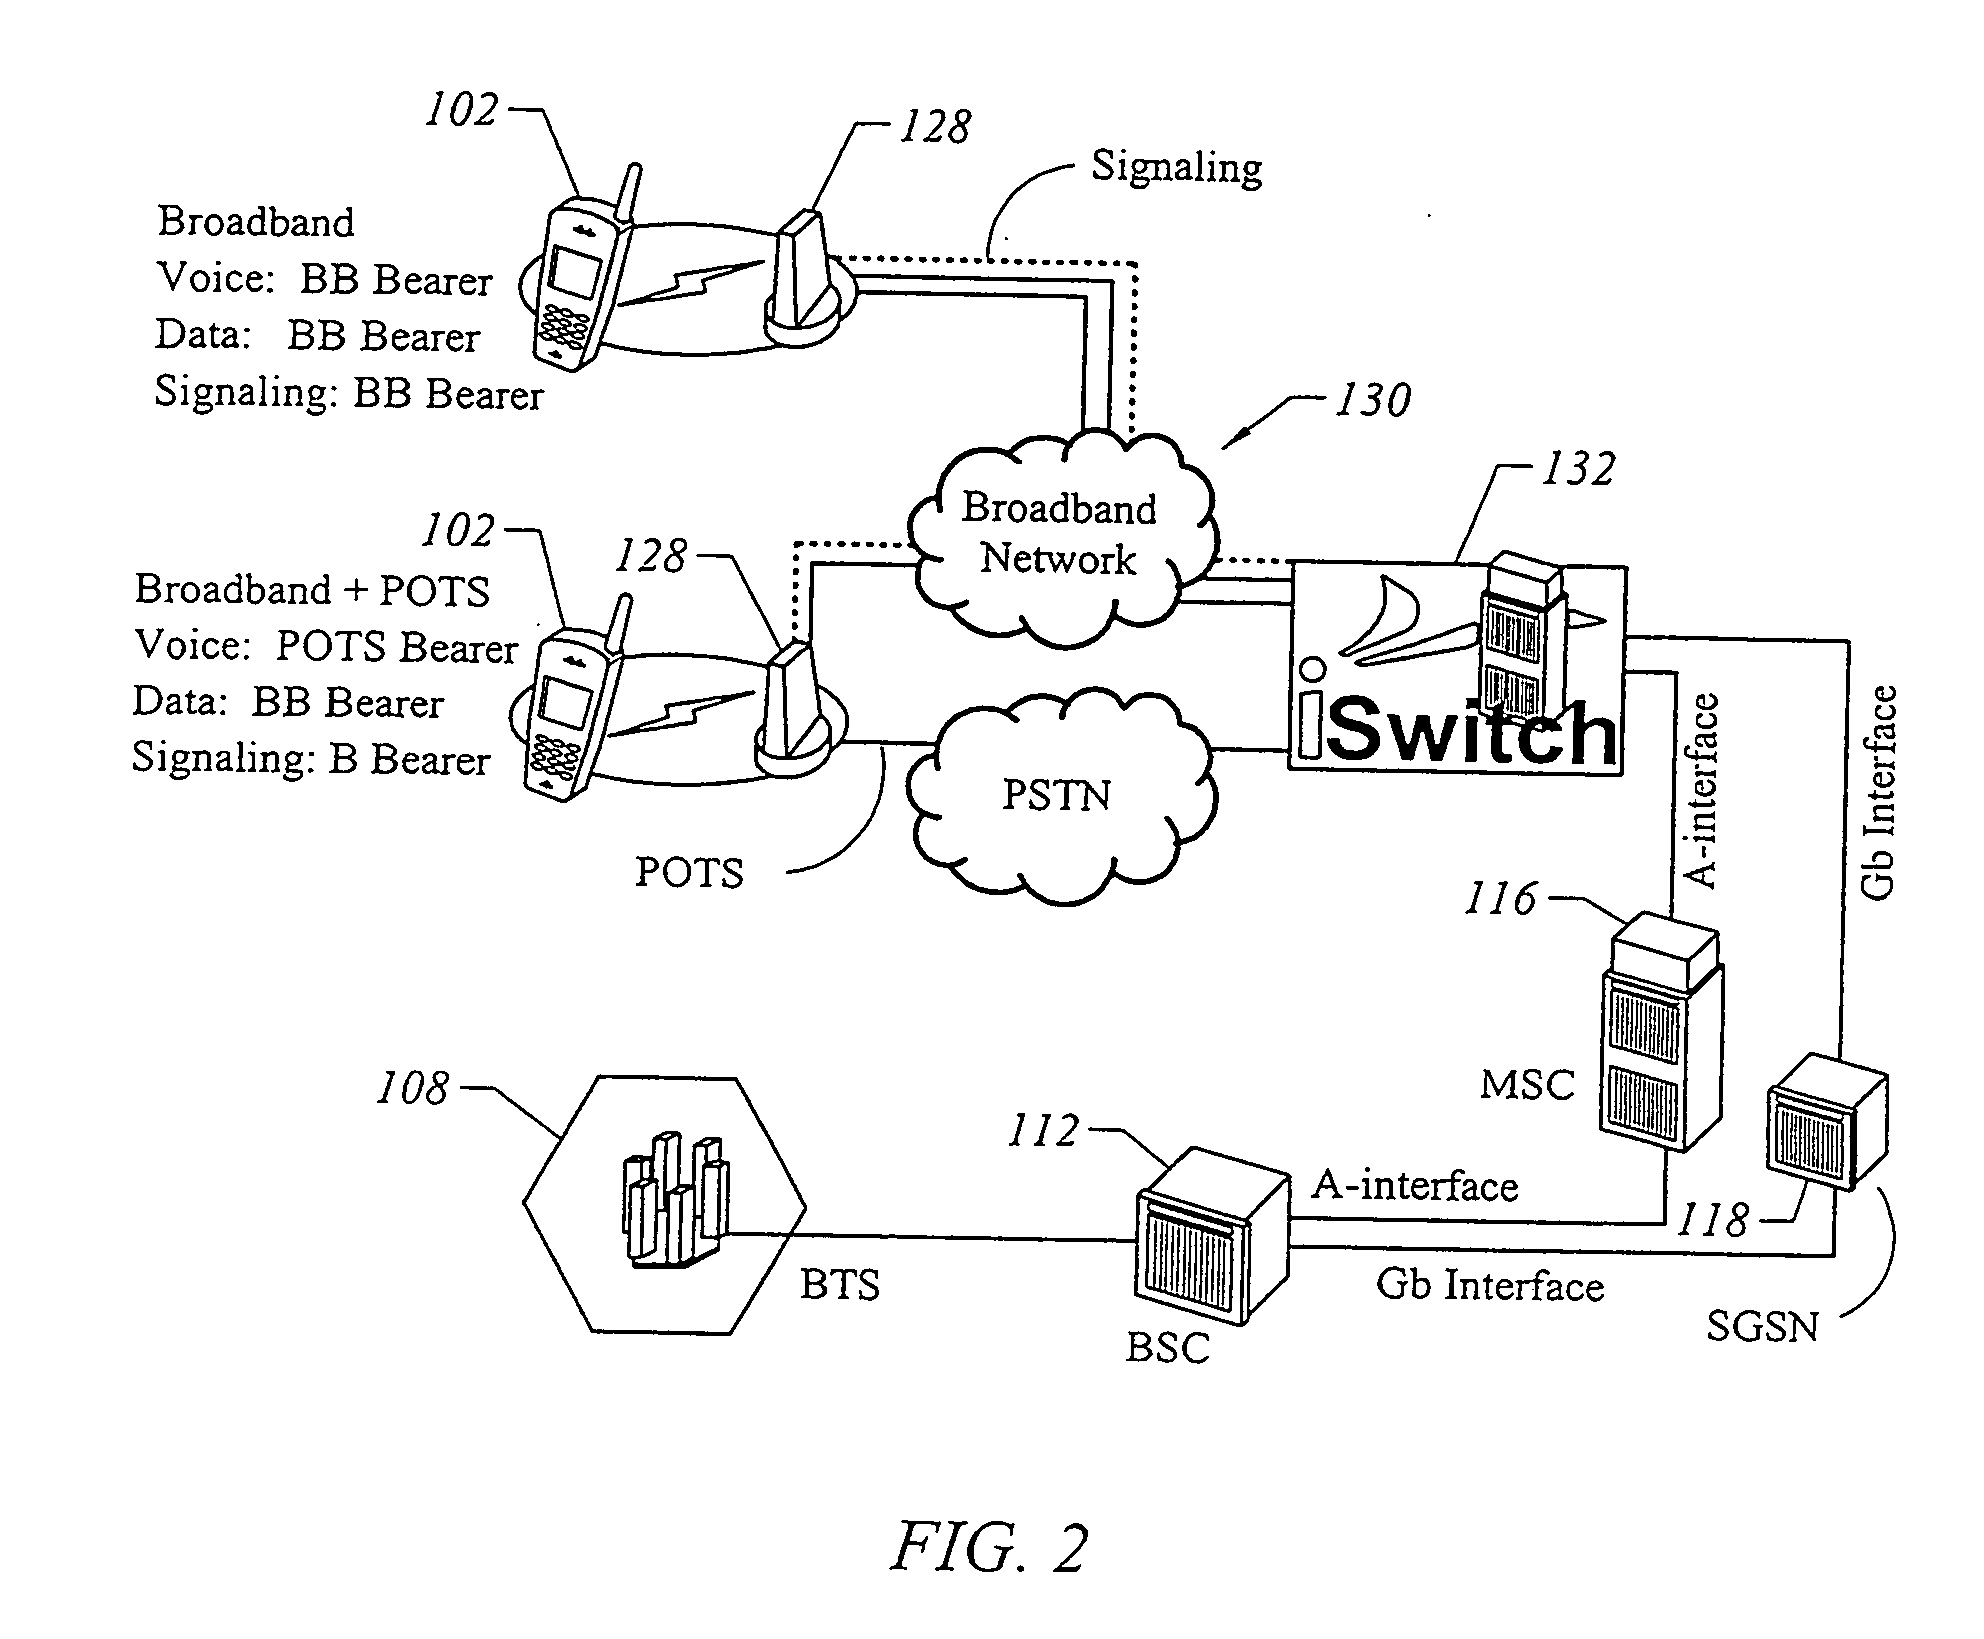 Mobile station implementation for switching between licensed and unlicensed wireless systems